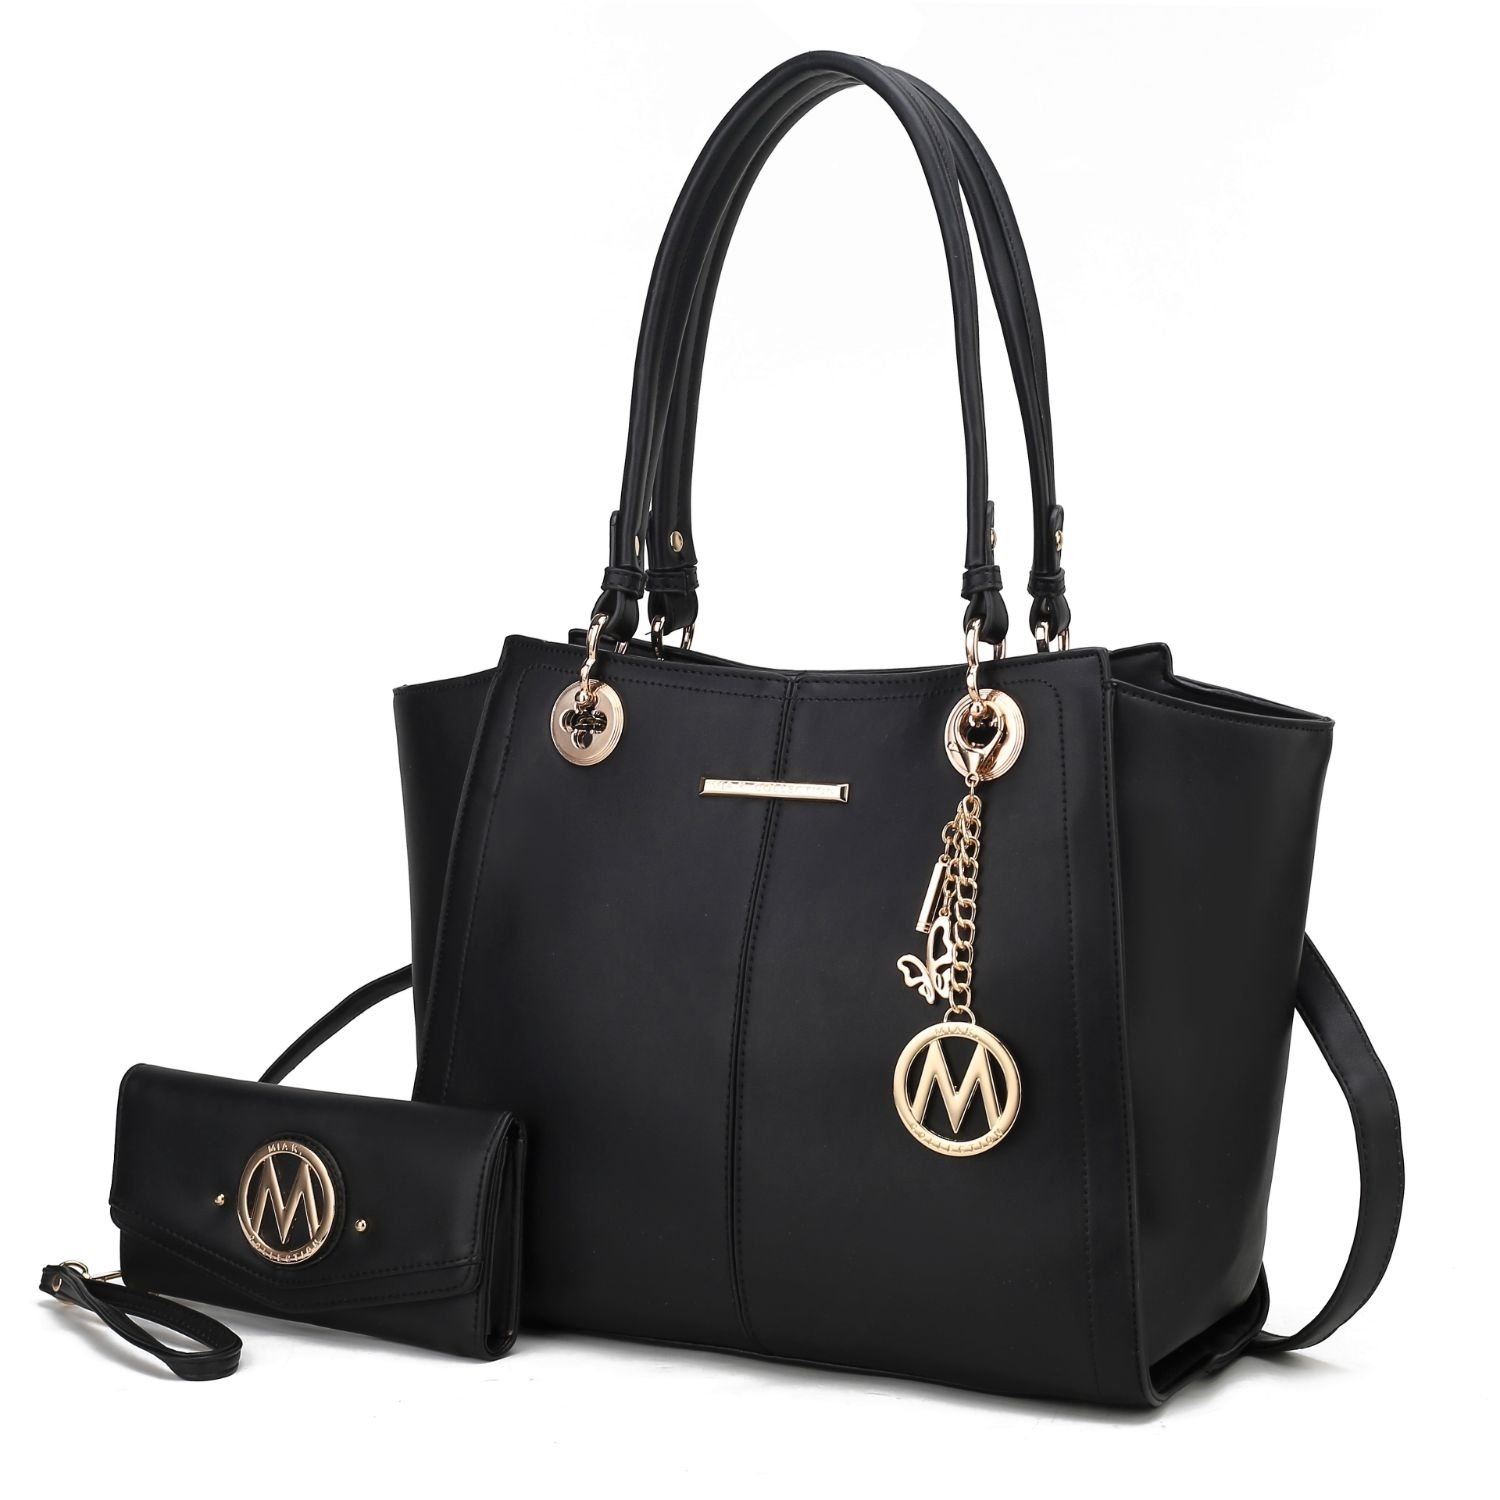 MKF Collection Ivy Vegan Leather Women's Tote Handbag By Mia K With Wallet -2 Pieces - Chocolate